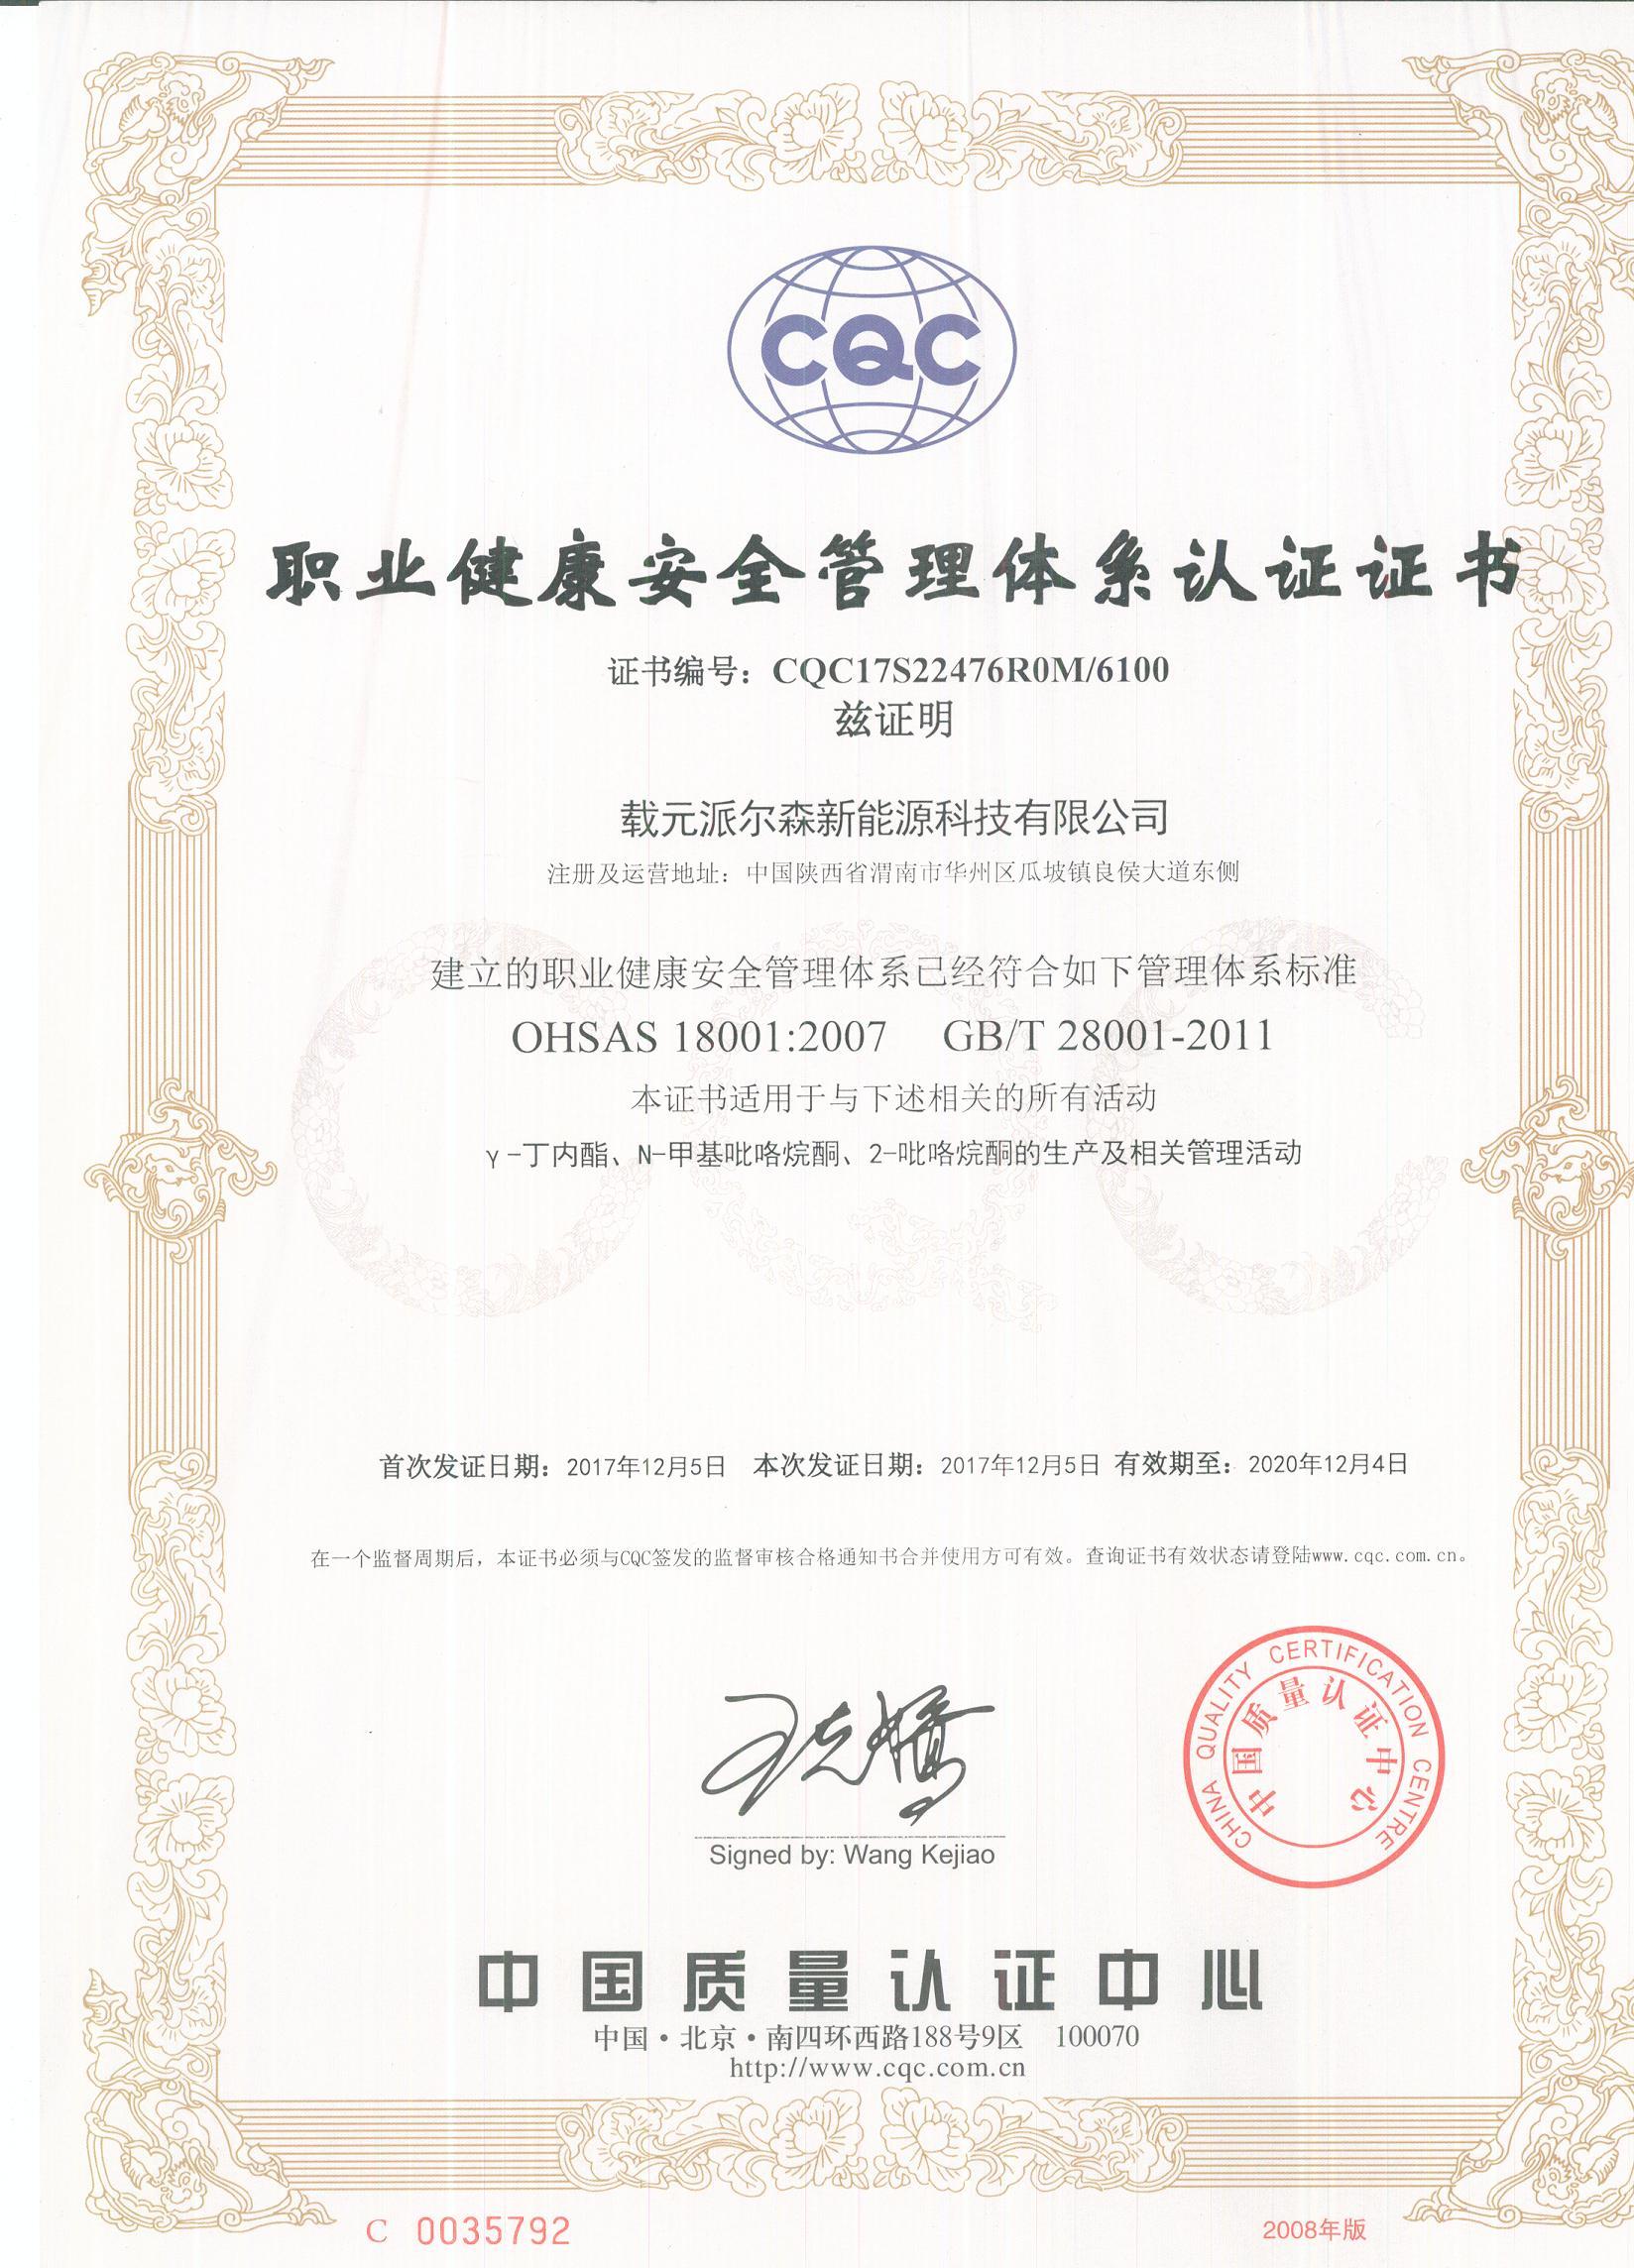 Our company 4 management systems have passed certification